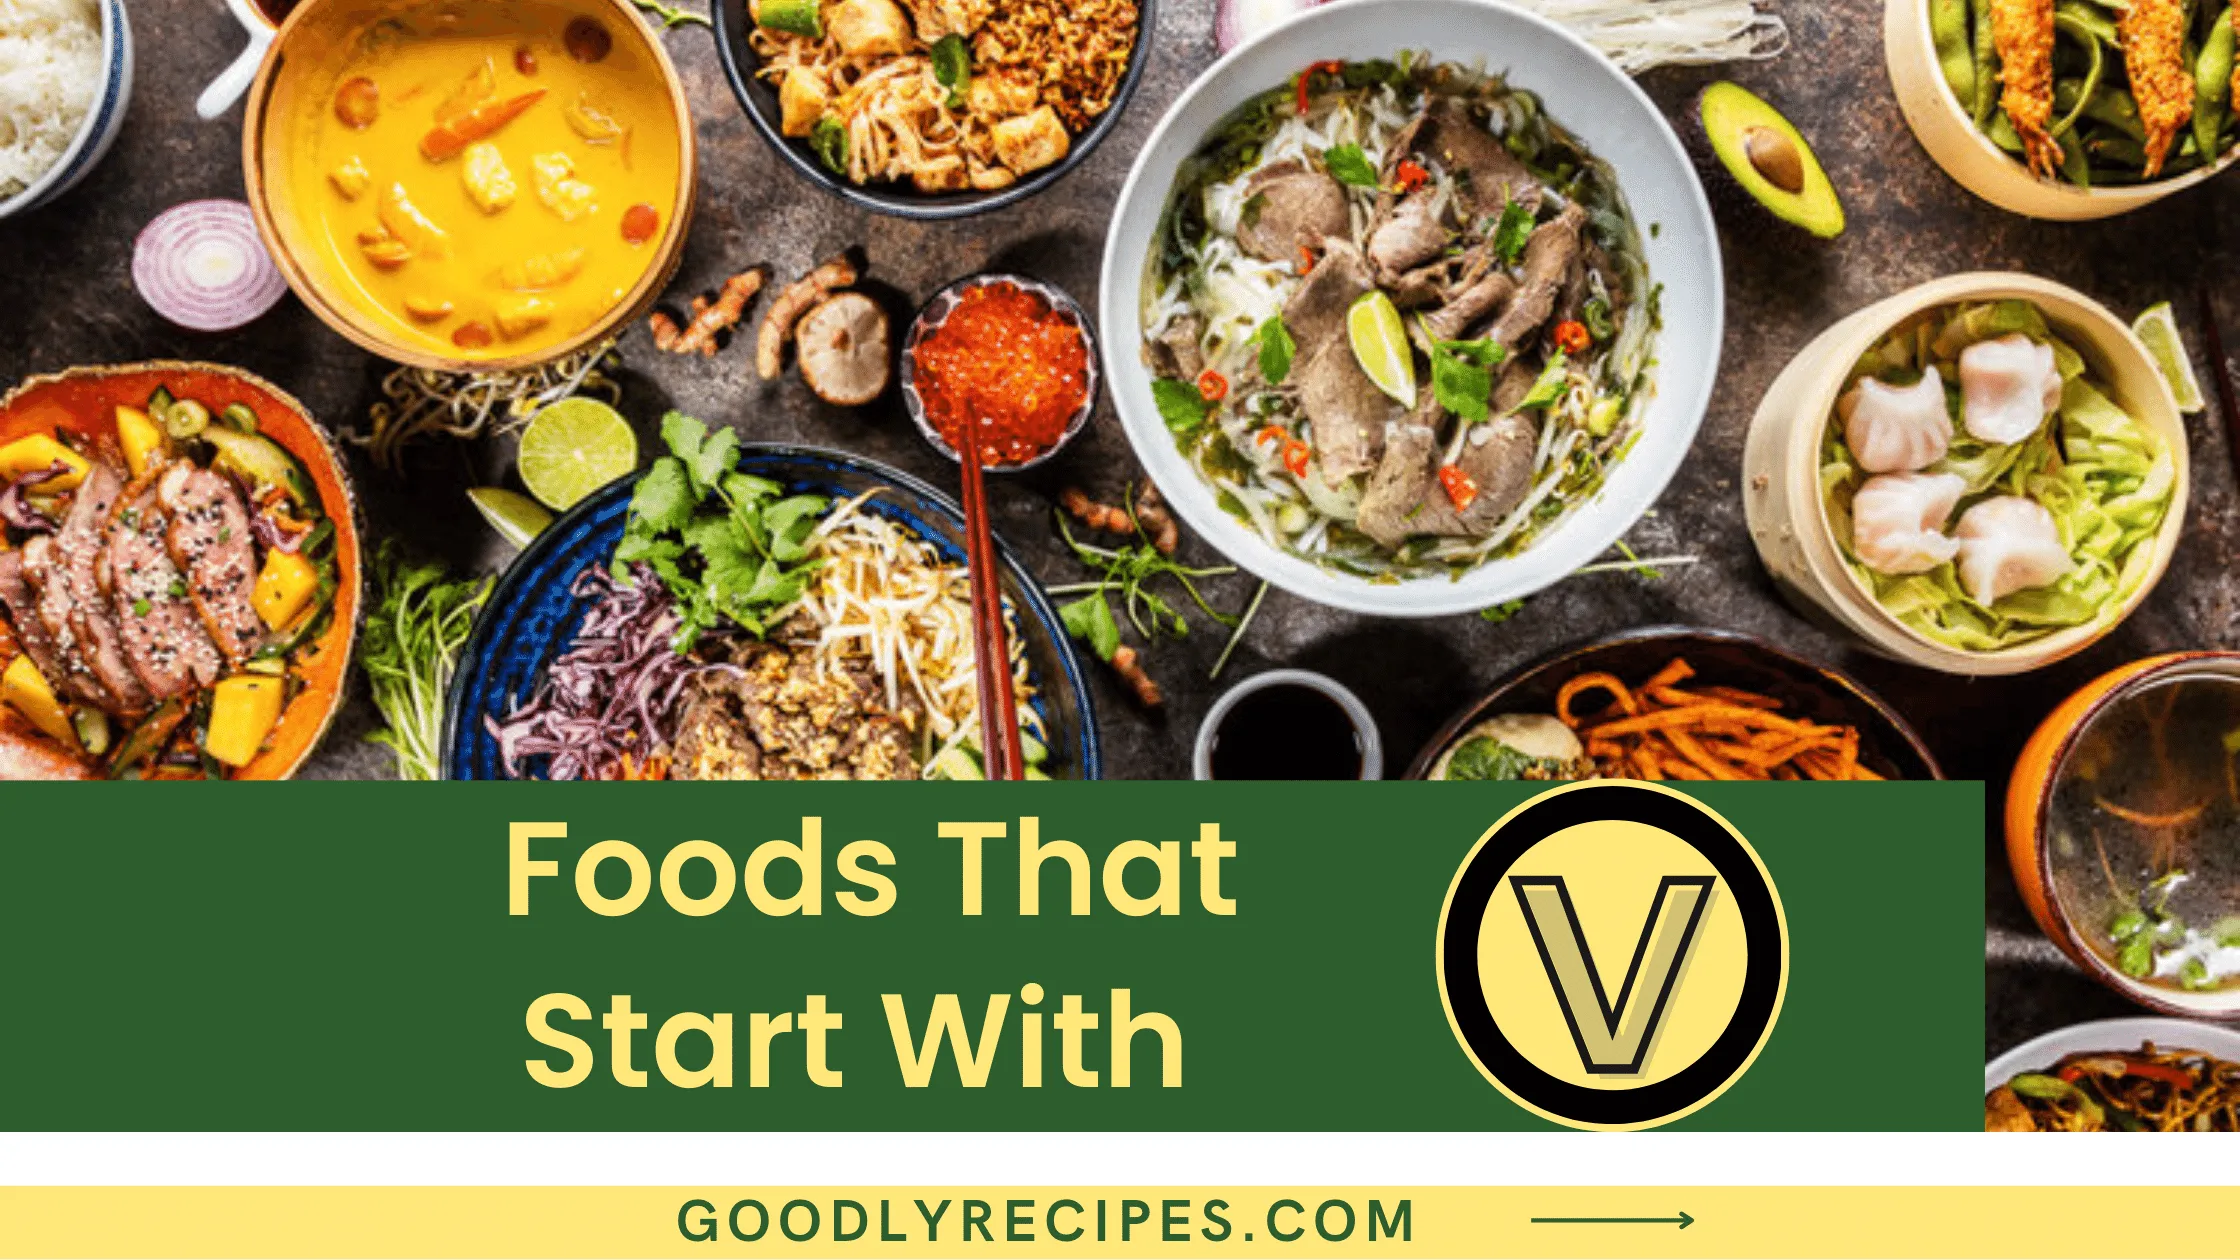 Foods That Start With V - Special Dishes